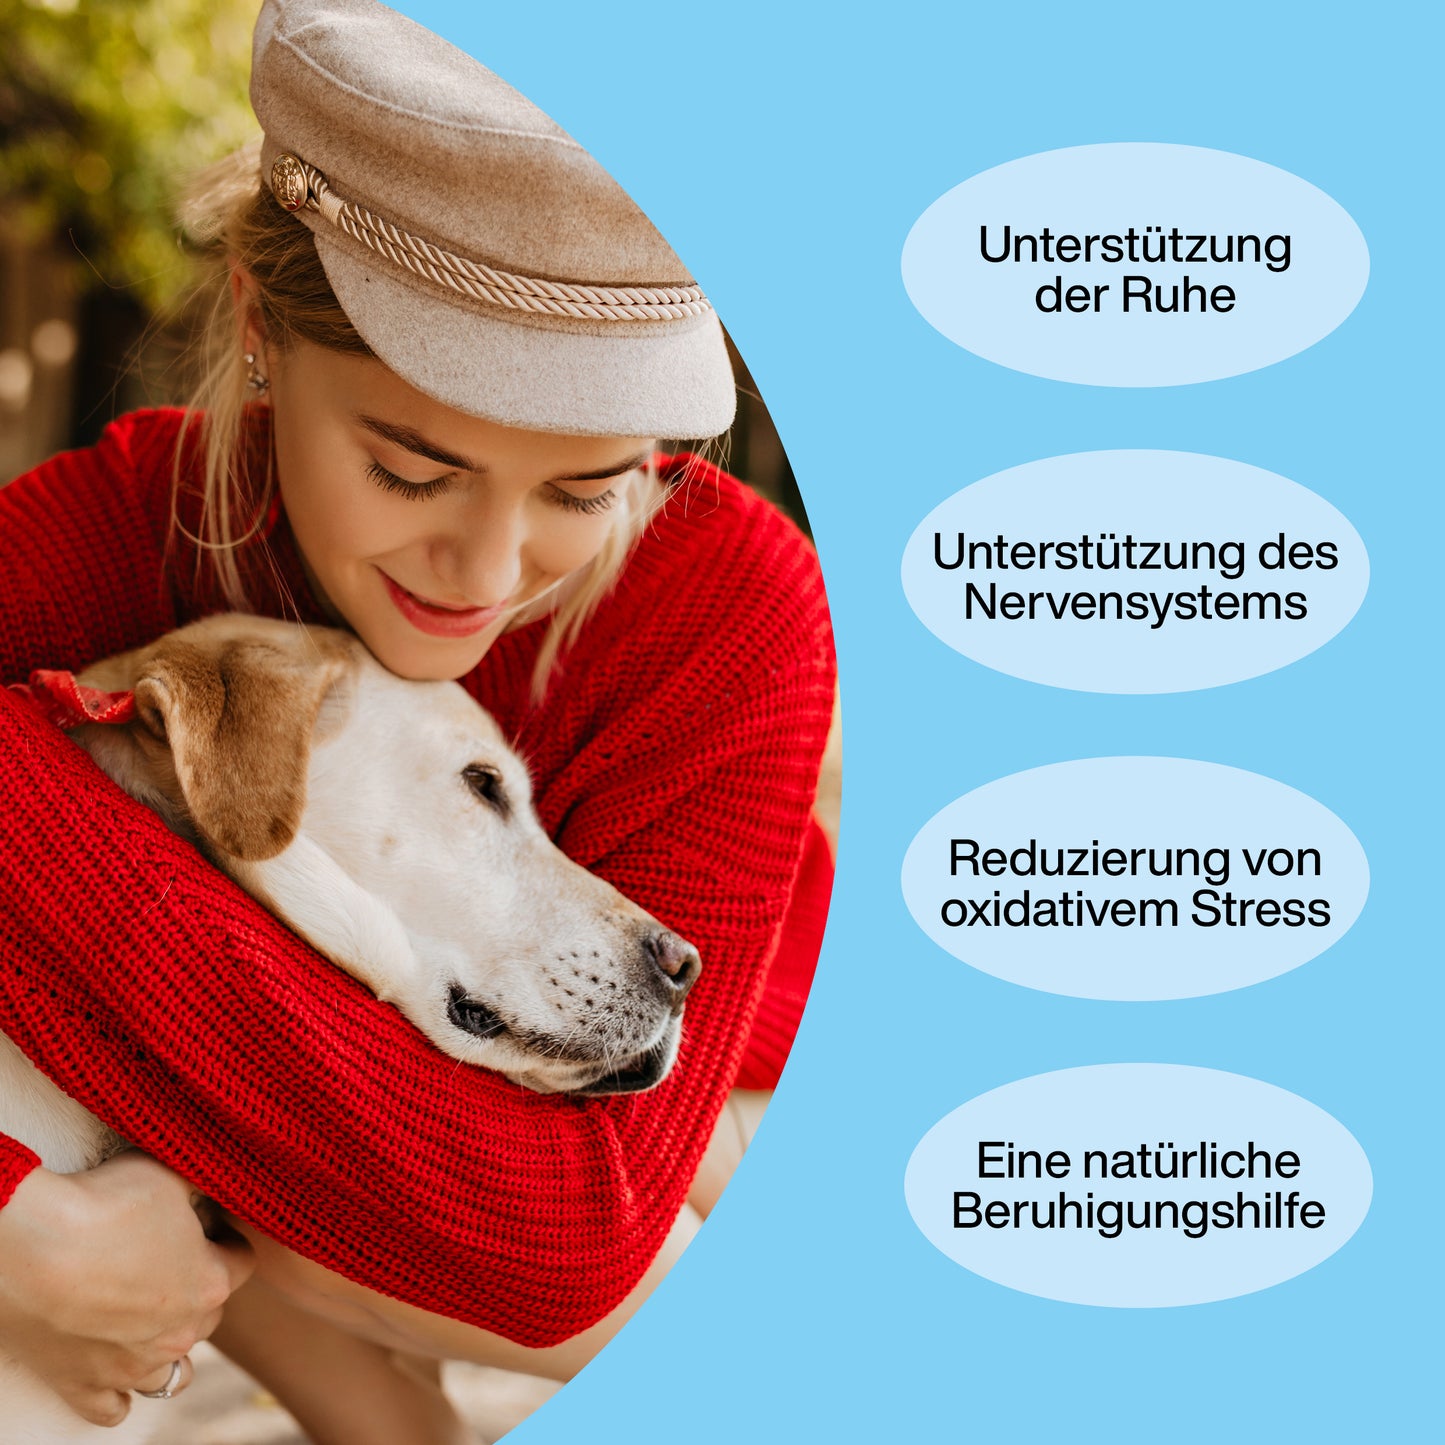 Vitamins for dogs "ANTISTRESS"